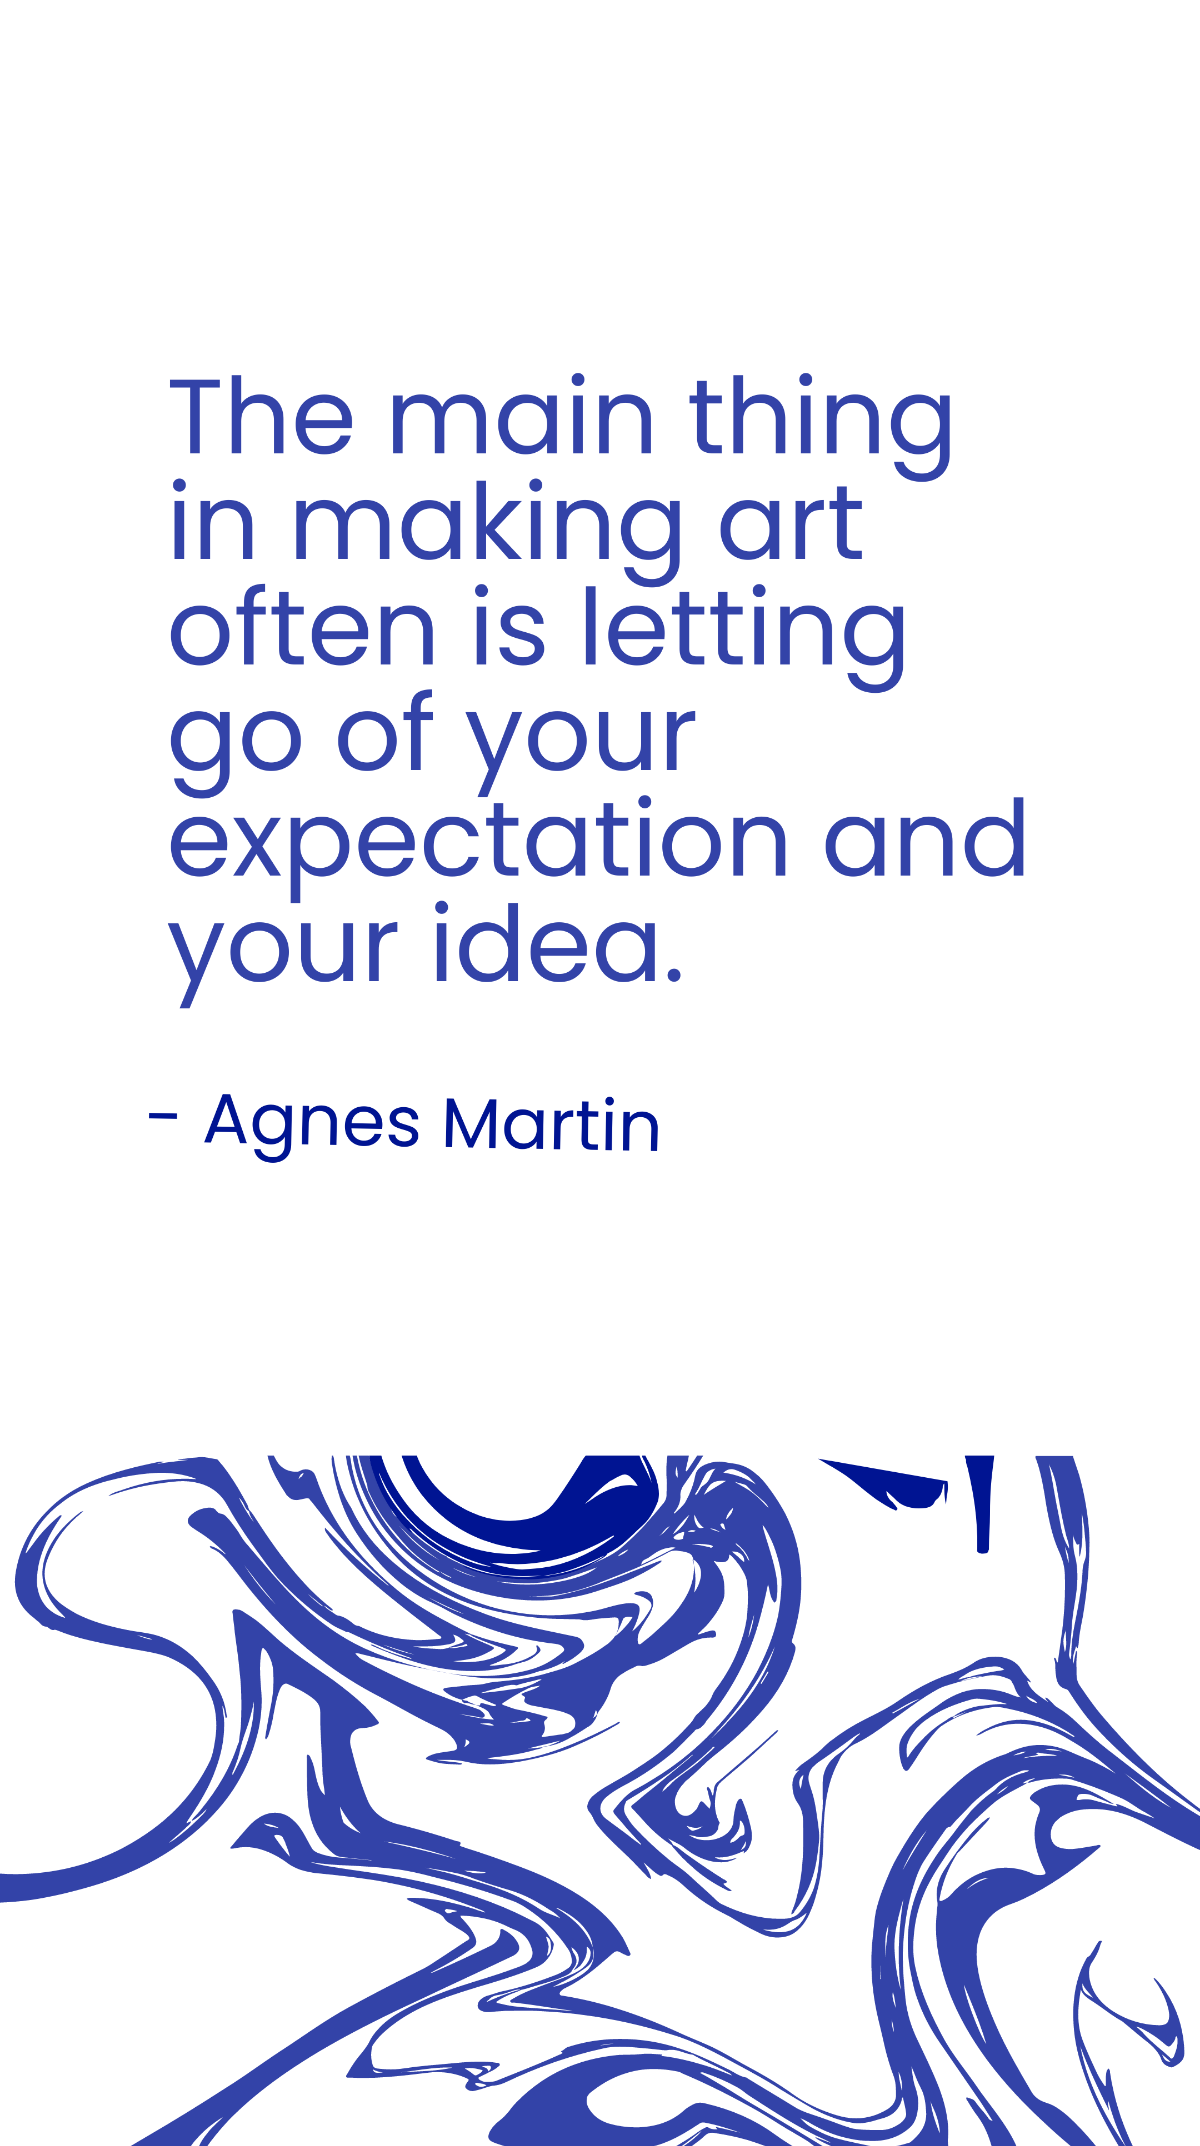 Agnes Martin - The main thing in making art often is letting go of your expectation and your idea. Template